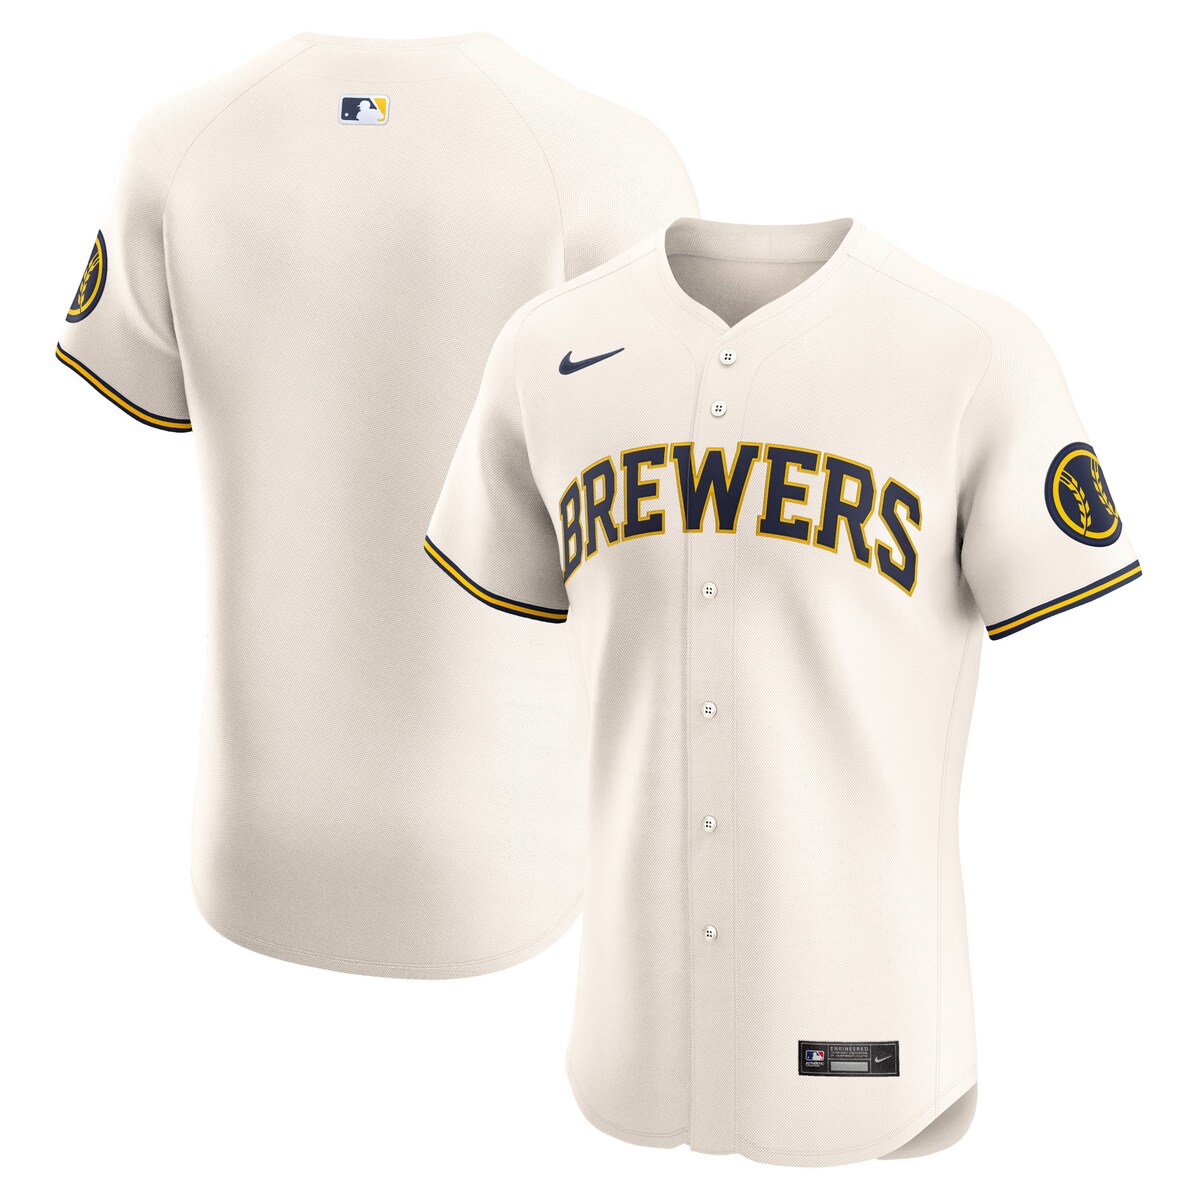 This Milwaukee Brewers Home Elite Jersey displays an authentic look to show off on game day and keeps you comfortable beyond the last out. Crafted by Nike using the lightweight comfort of stretch mesh fabric, it features the same premium details as the official on-field design of your Milwaukee Brewers. The innovative Vapor Premier chassis allows for more flexible movement and teams up with Dri-FIT ADV technology to deliver exceptional sweat-wicking power.Made in the USABrand: NikeShort sleeveNike EliteNike Elite jersey delivers the same look worn by the pros on the fieldMaterial: 95% Recycled Polyester/5% ElastaneRounded hemOfficially licensedFull-button frontDri-FIT ADV technology combines moisture-wicking fabric with advanced engineering and features to help you stay dry and comfortableSewn-down tackle twill logo or wordmark, player name and numbers and sleeve patch (where applicable)Embroidered Swoosh logoHeat-applied woven MLB Batterman and jock tagVapor Premier chassis improves mobility, enhances moisture management and provides a lightweight fit with additional stretchMachine wash, tumble dry lowAthletic cutJersey Color Style: Home